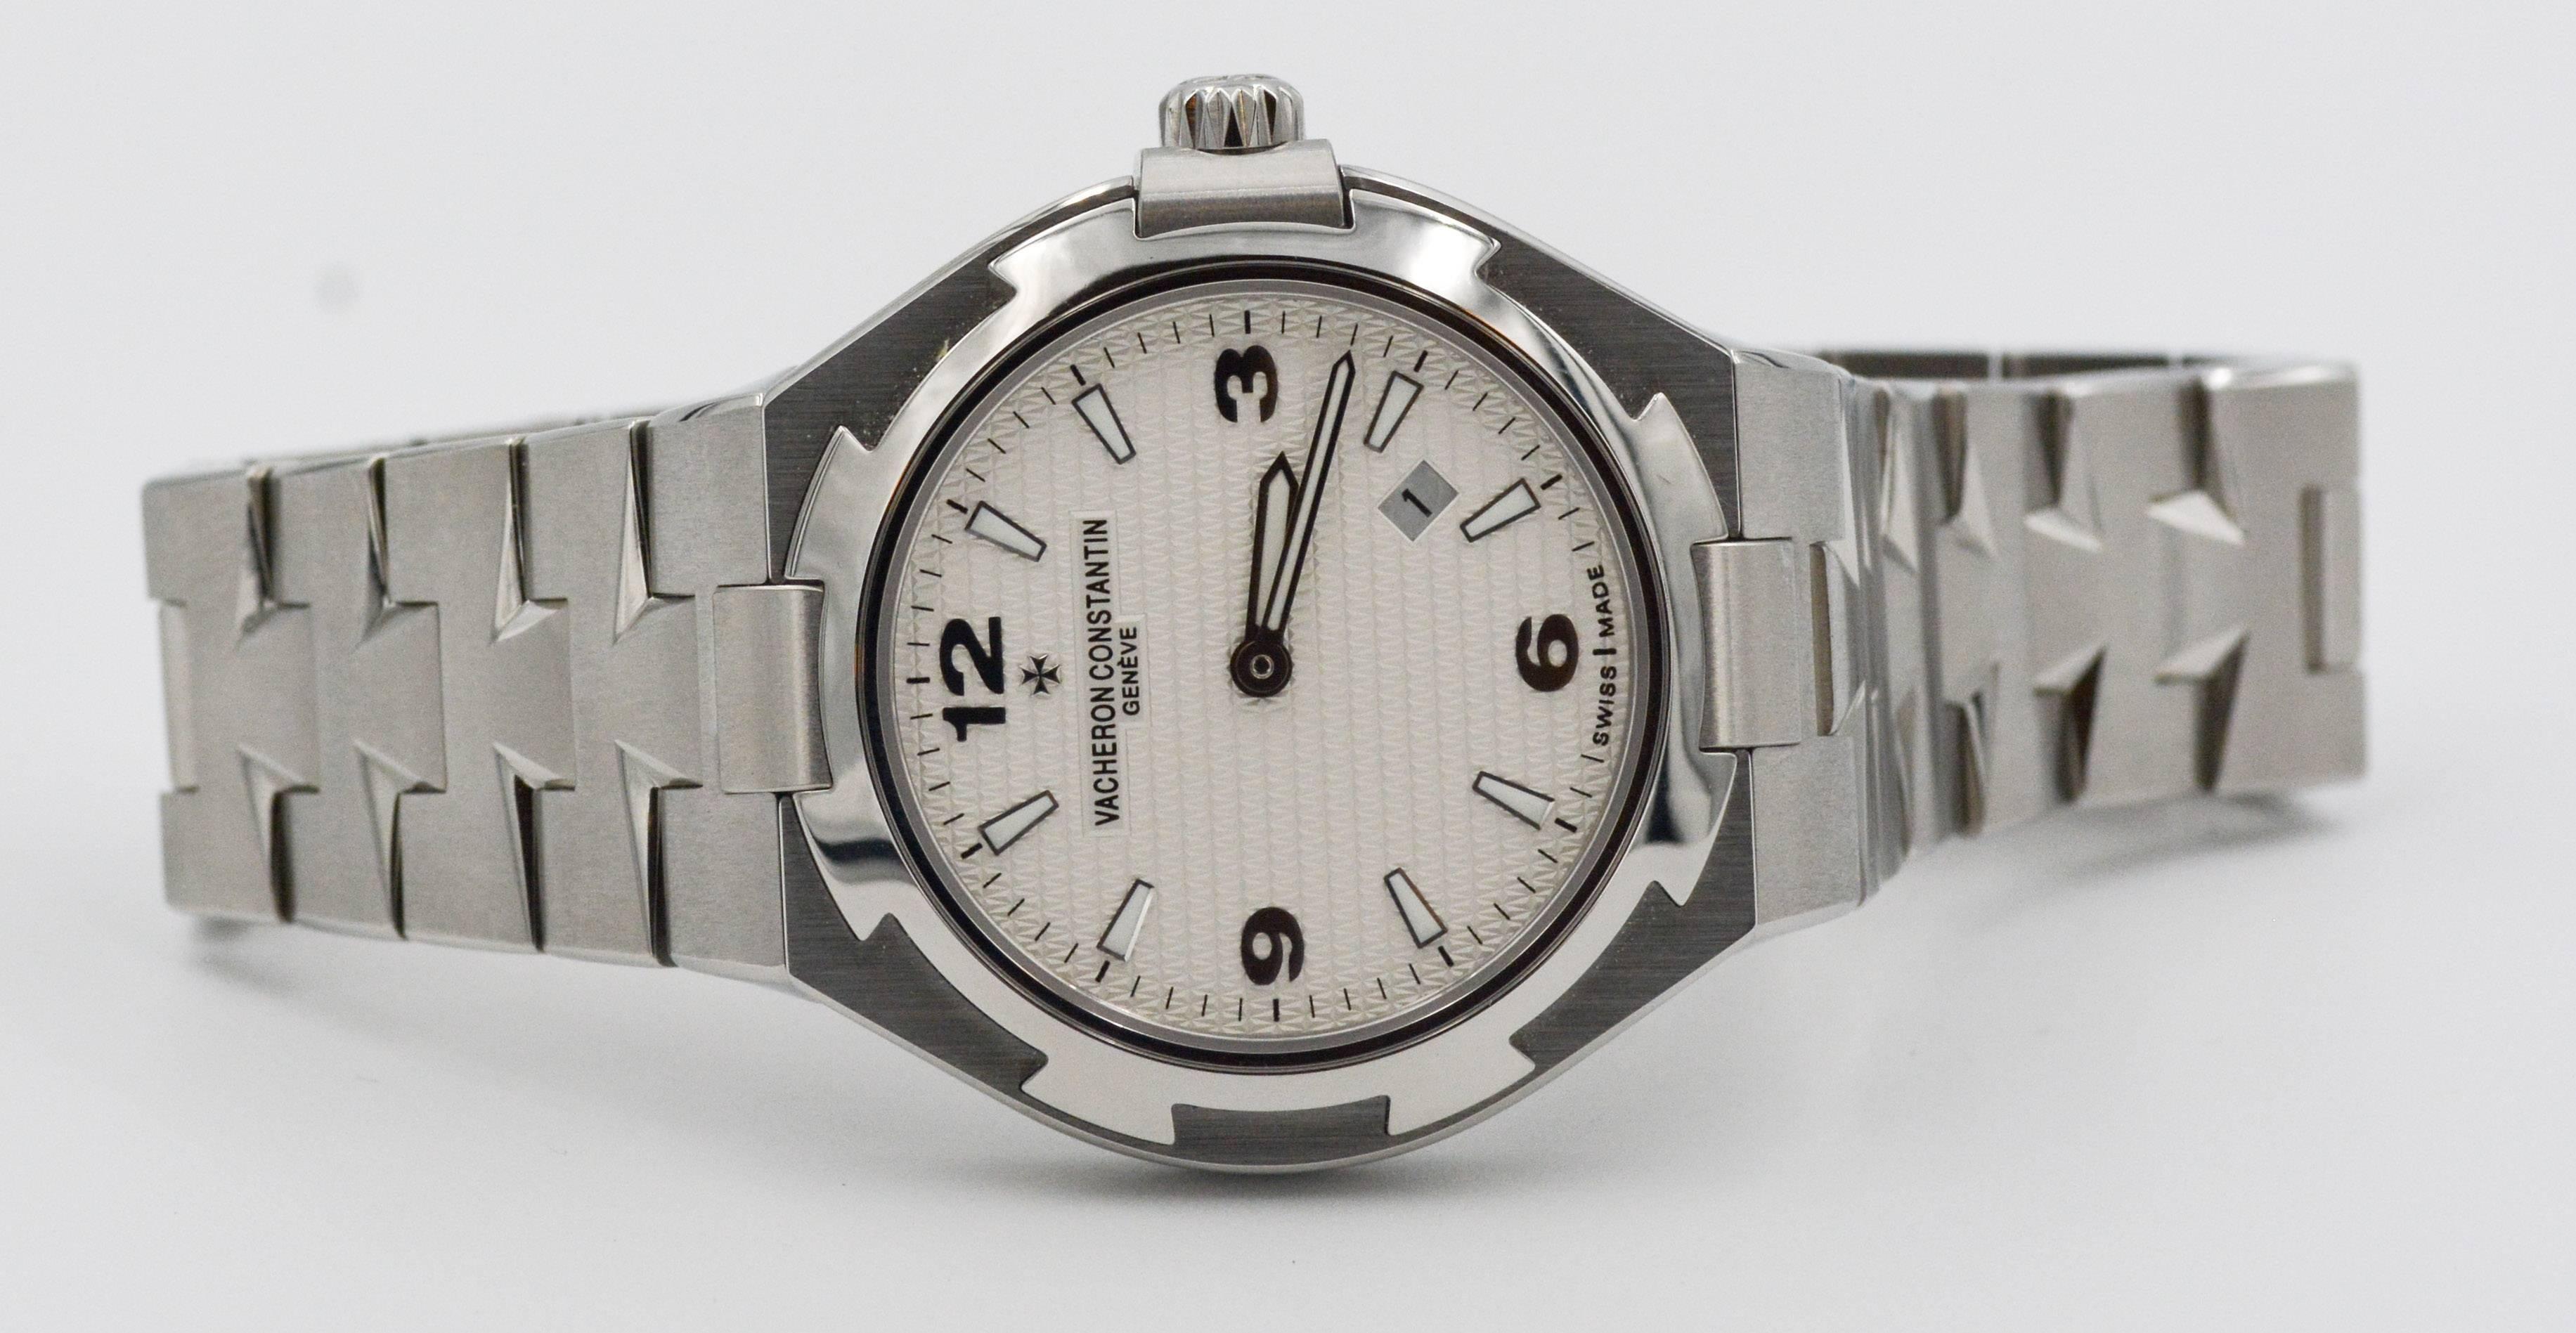 • Model: Overseas
• Movement: Quartz
• Case Size: 30mm 
• Case Material: Stainless steel
• Dial: White
• Strap: Stainless steel
• Closure/Clasp Type: Pushbutton deployment clasp
• CIRCA 2010; no box and no papers
• Excellent condition 

The